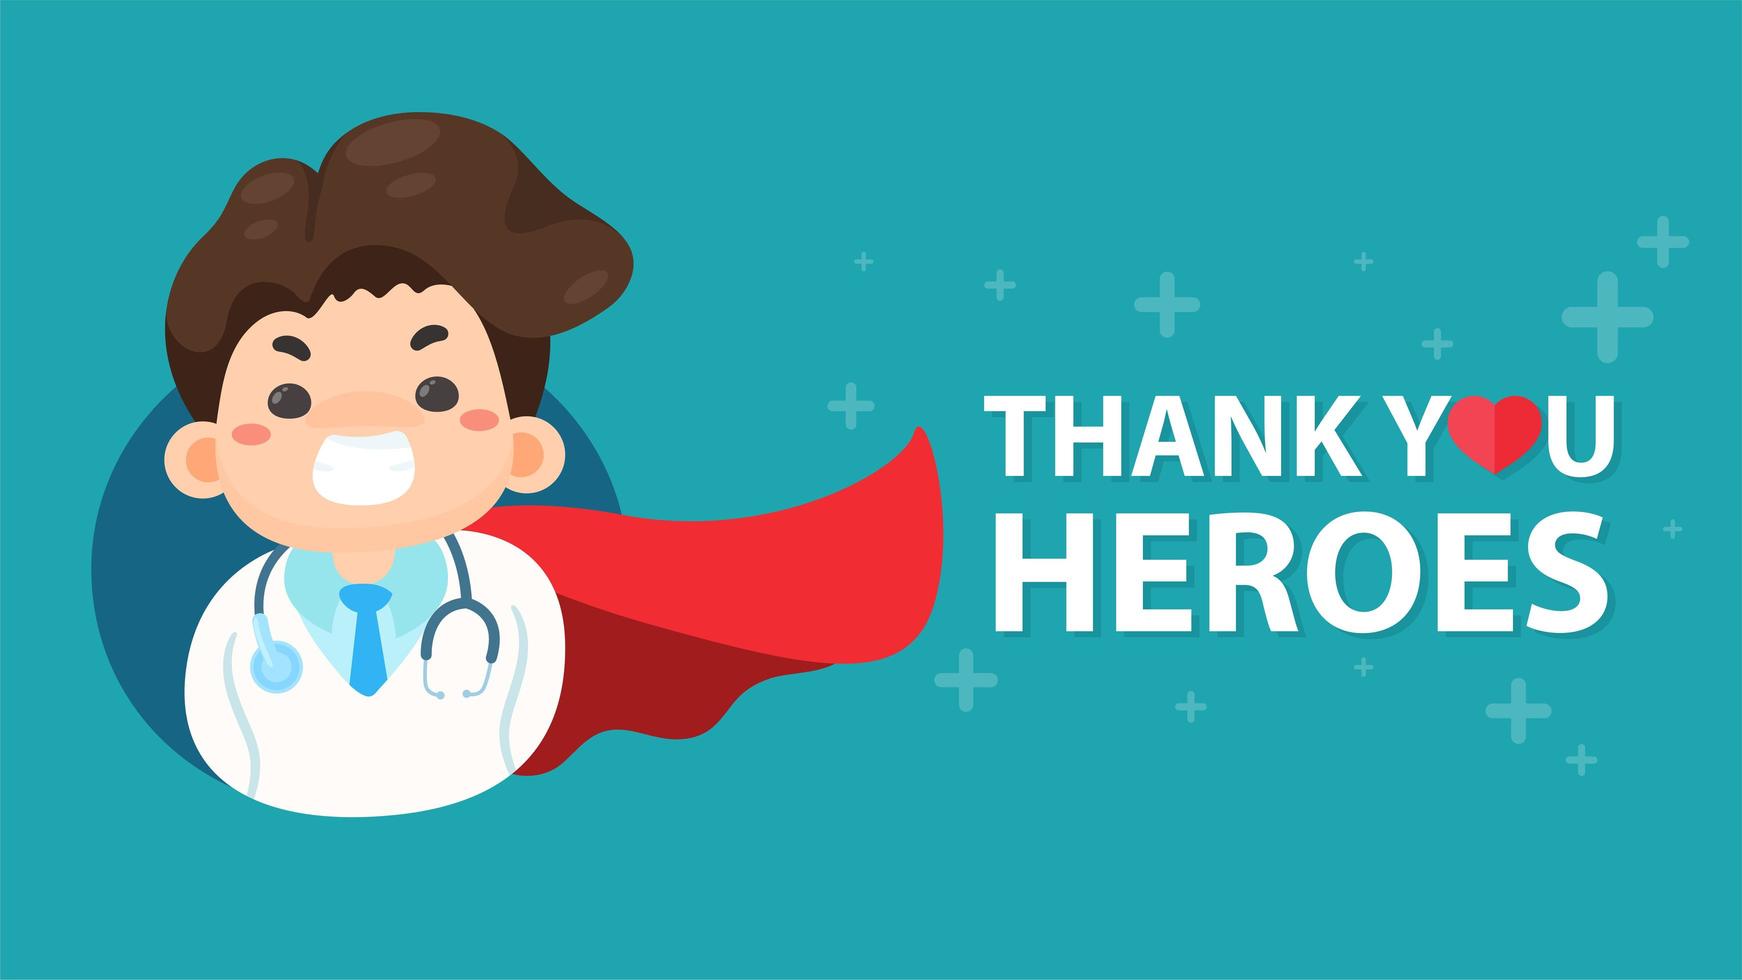 Doctor Smiling with Red Superhero Cape vector